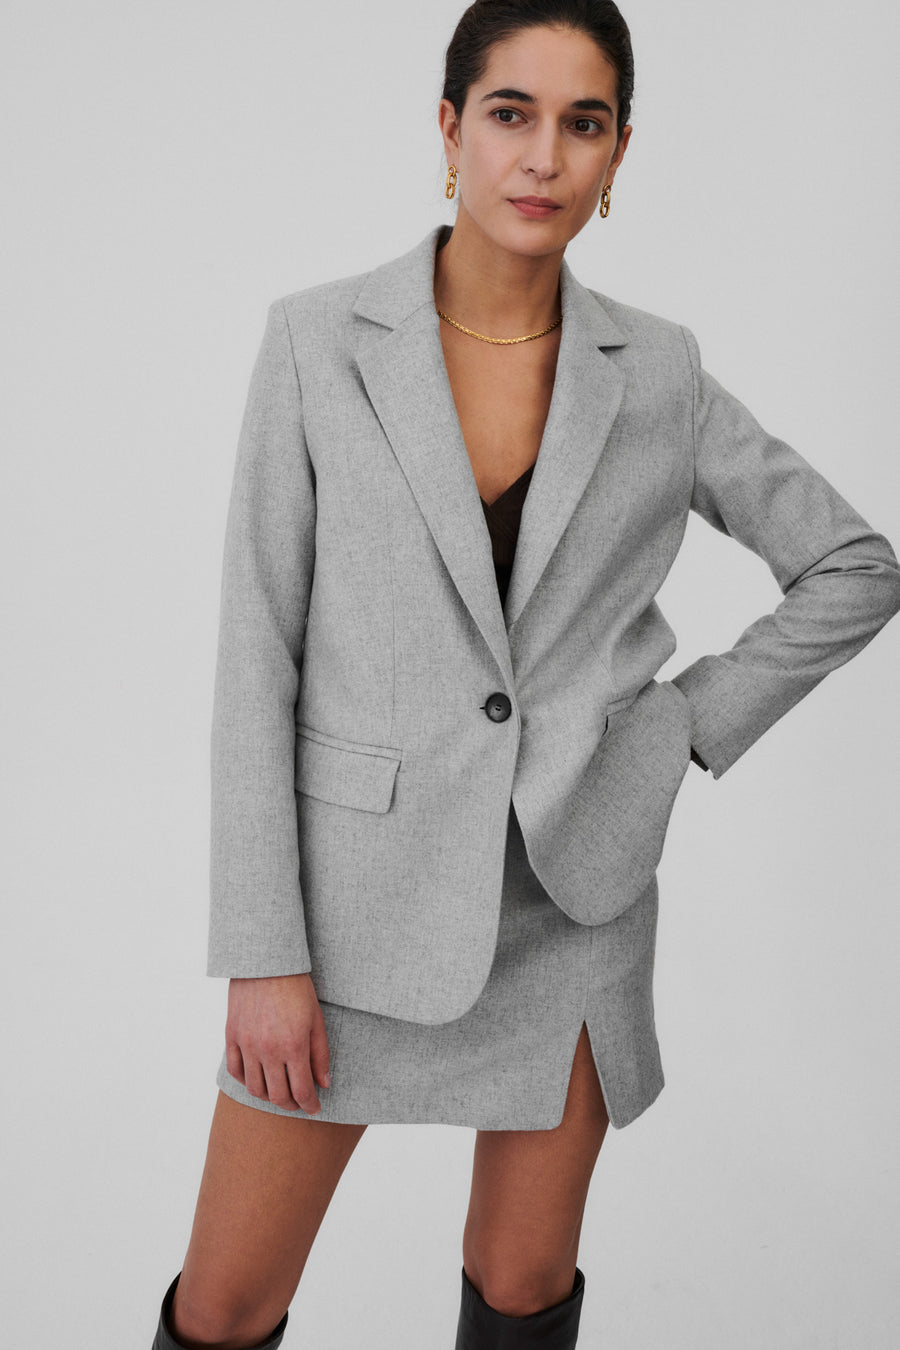 Recycled wool blend blazer / 18 / 04 / cloud grey *wool-blend-skirt-07-02-cloud-grey* ?The model is 176cm tall and wears size S?